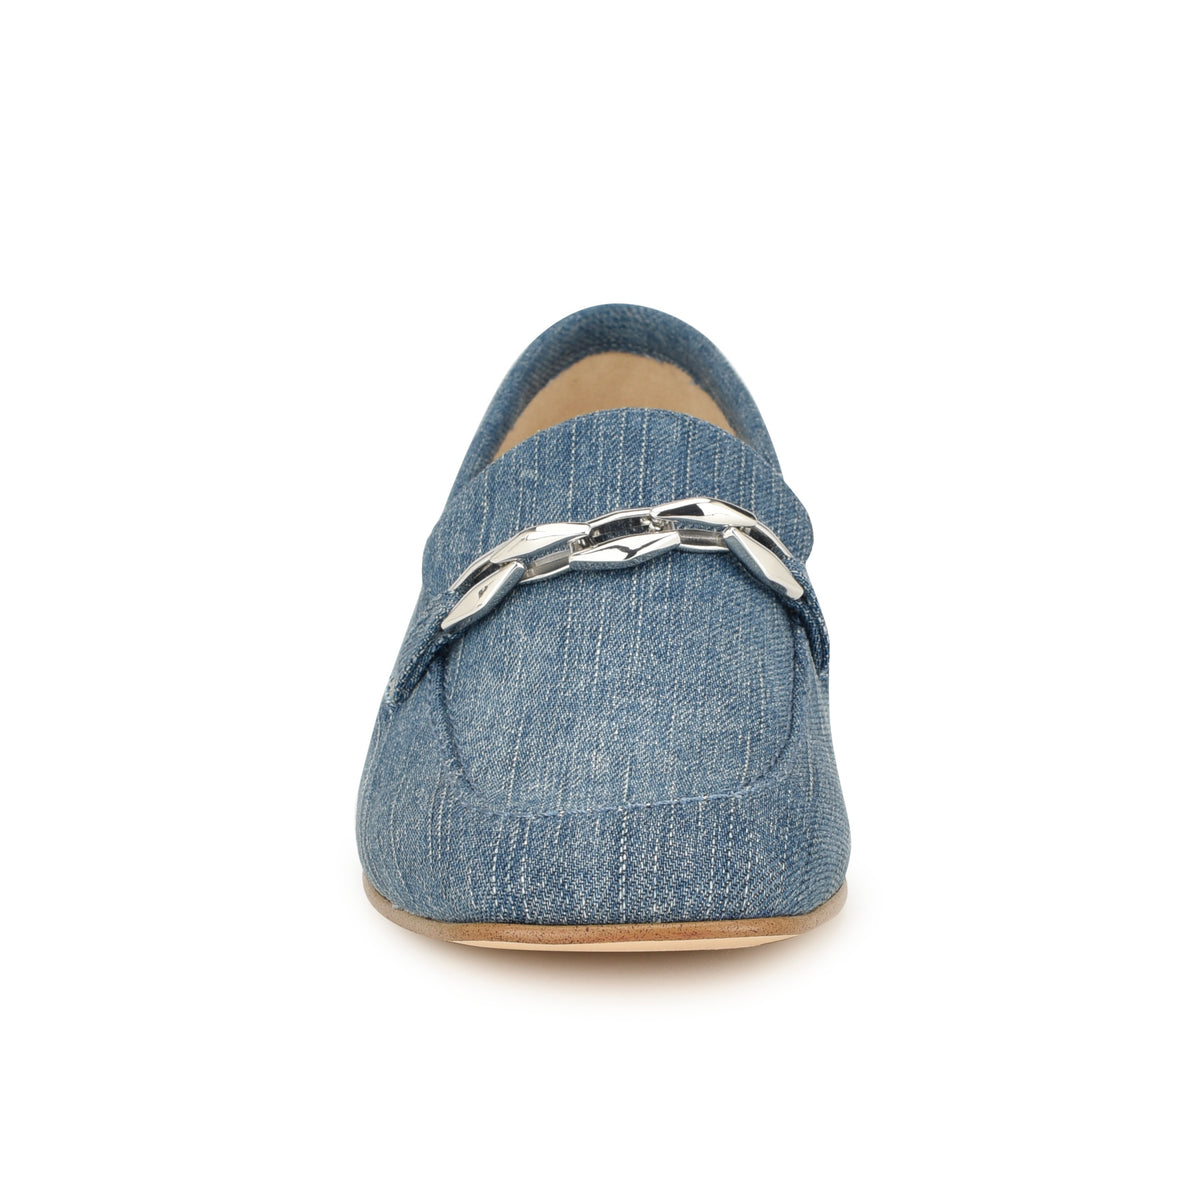 Erands Casual Loafers